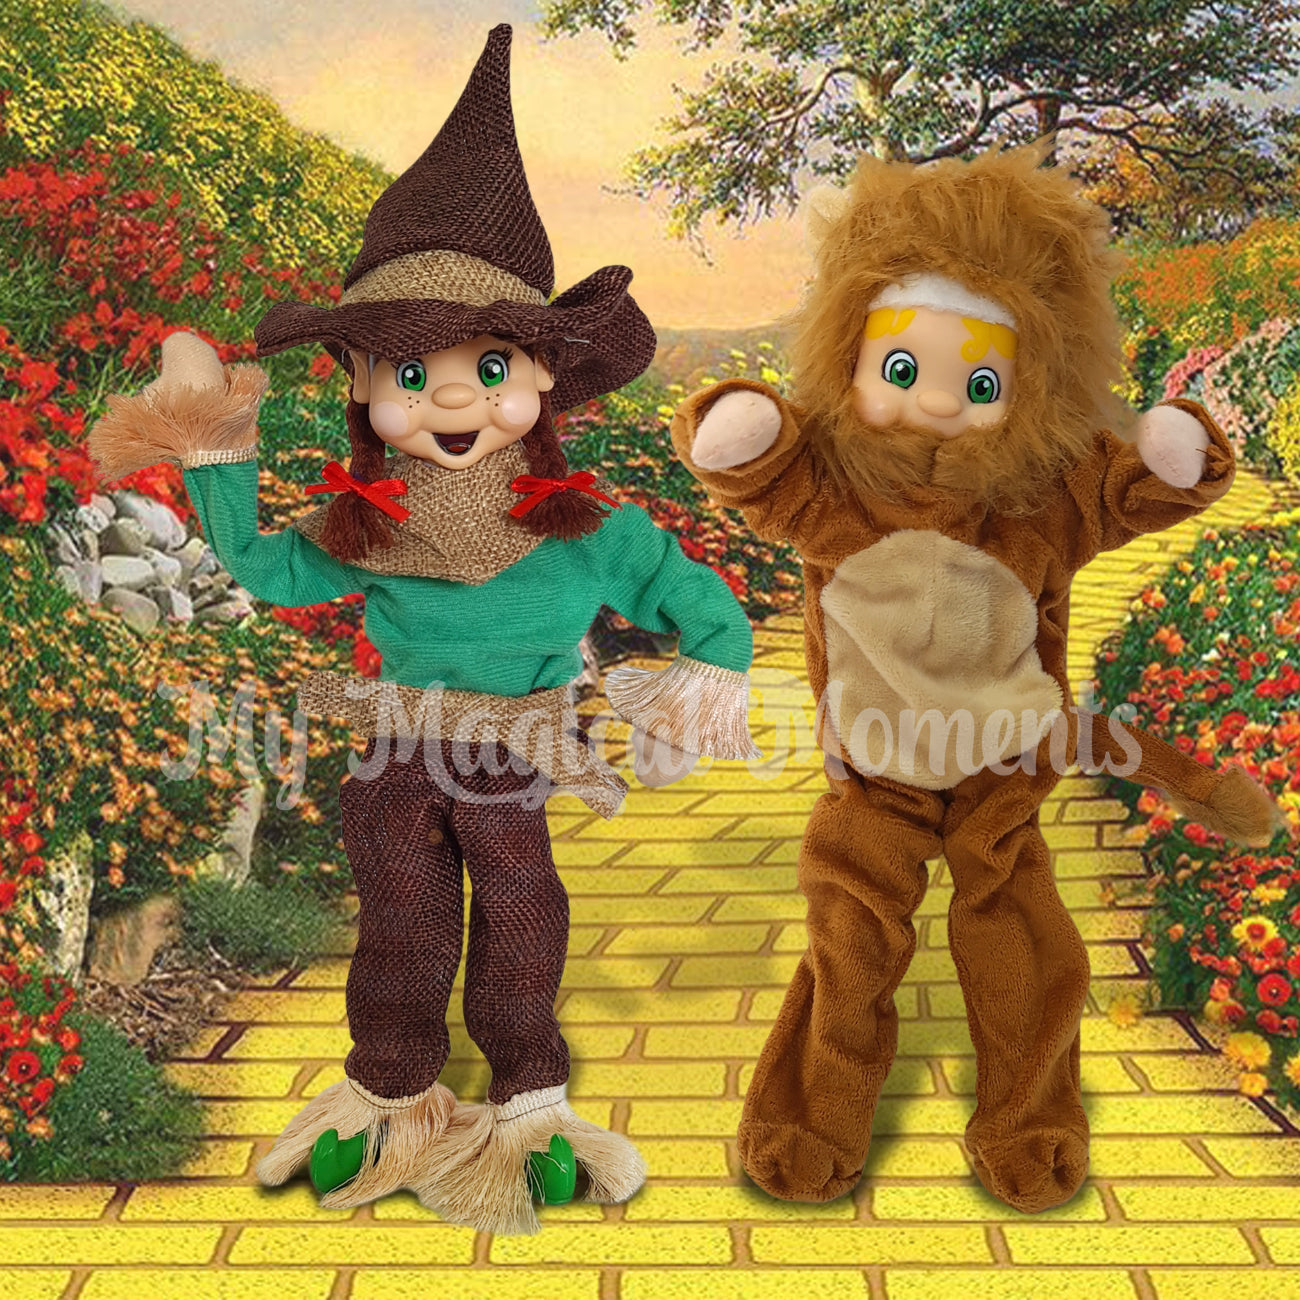 Elves dressed as a lion and scarecrow on a yellow brick road